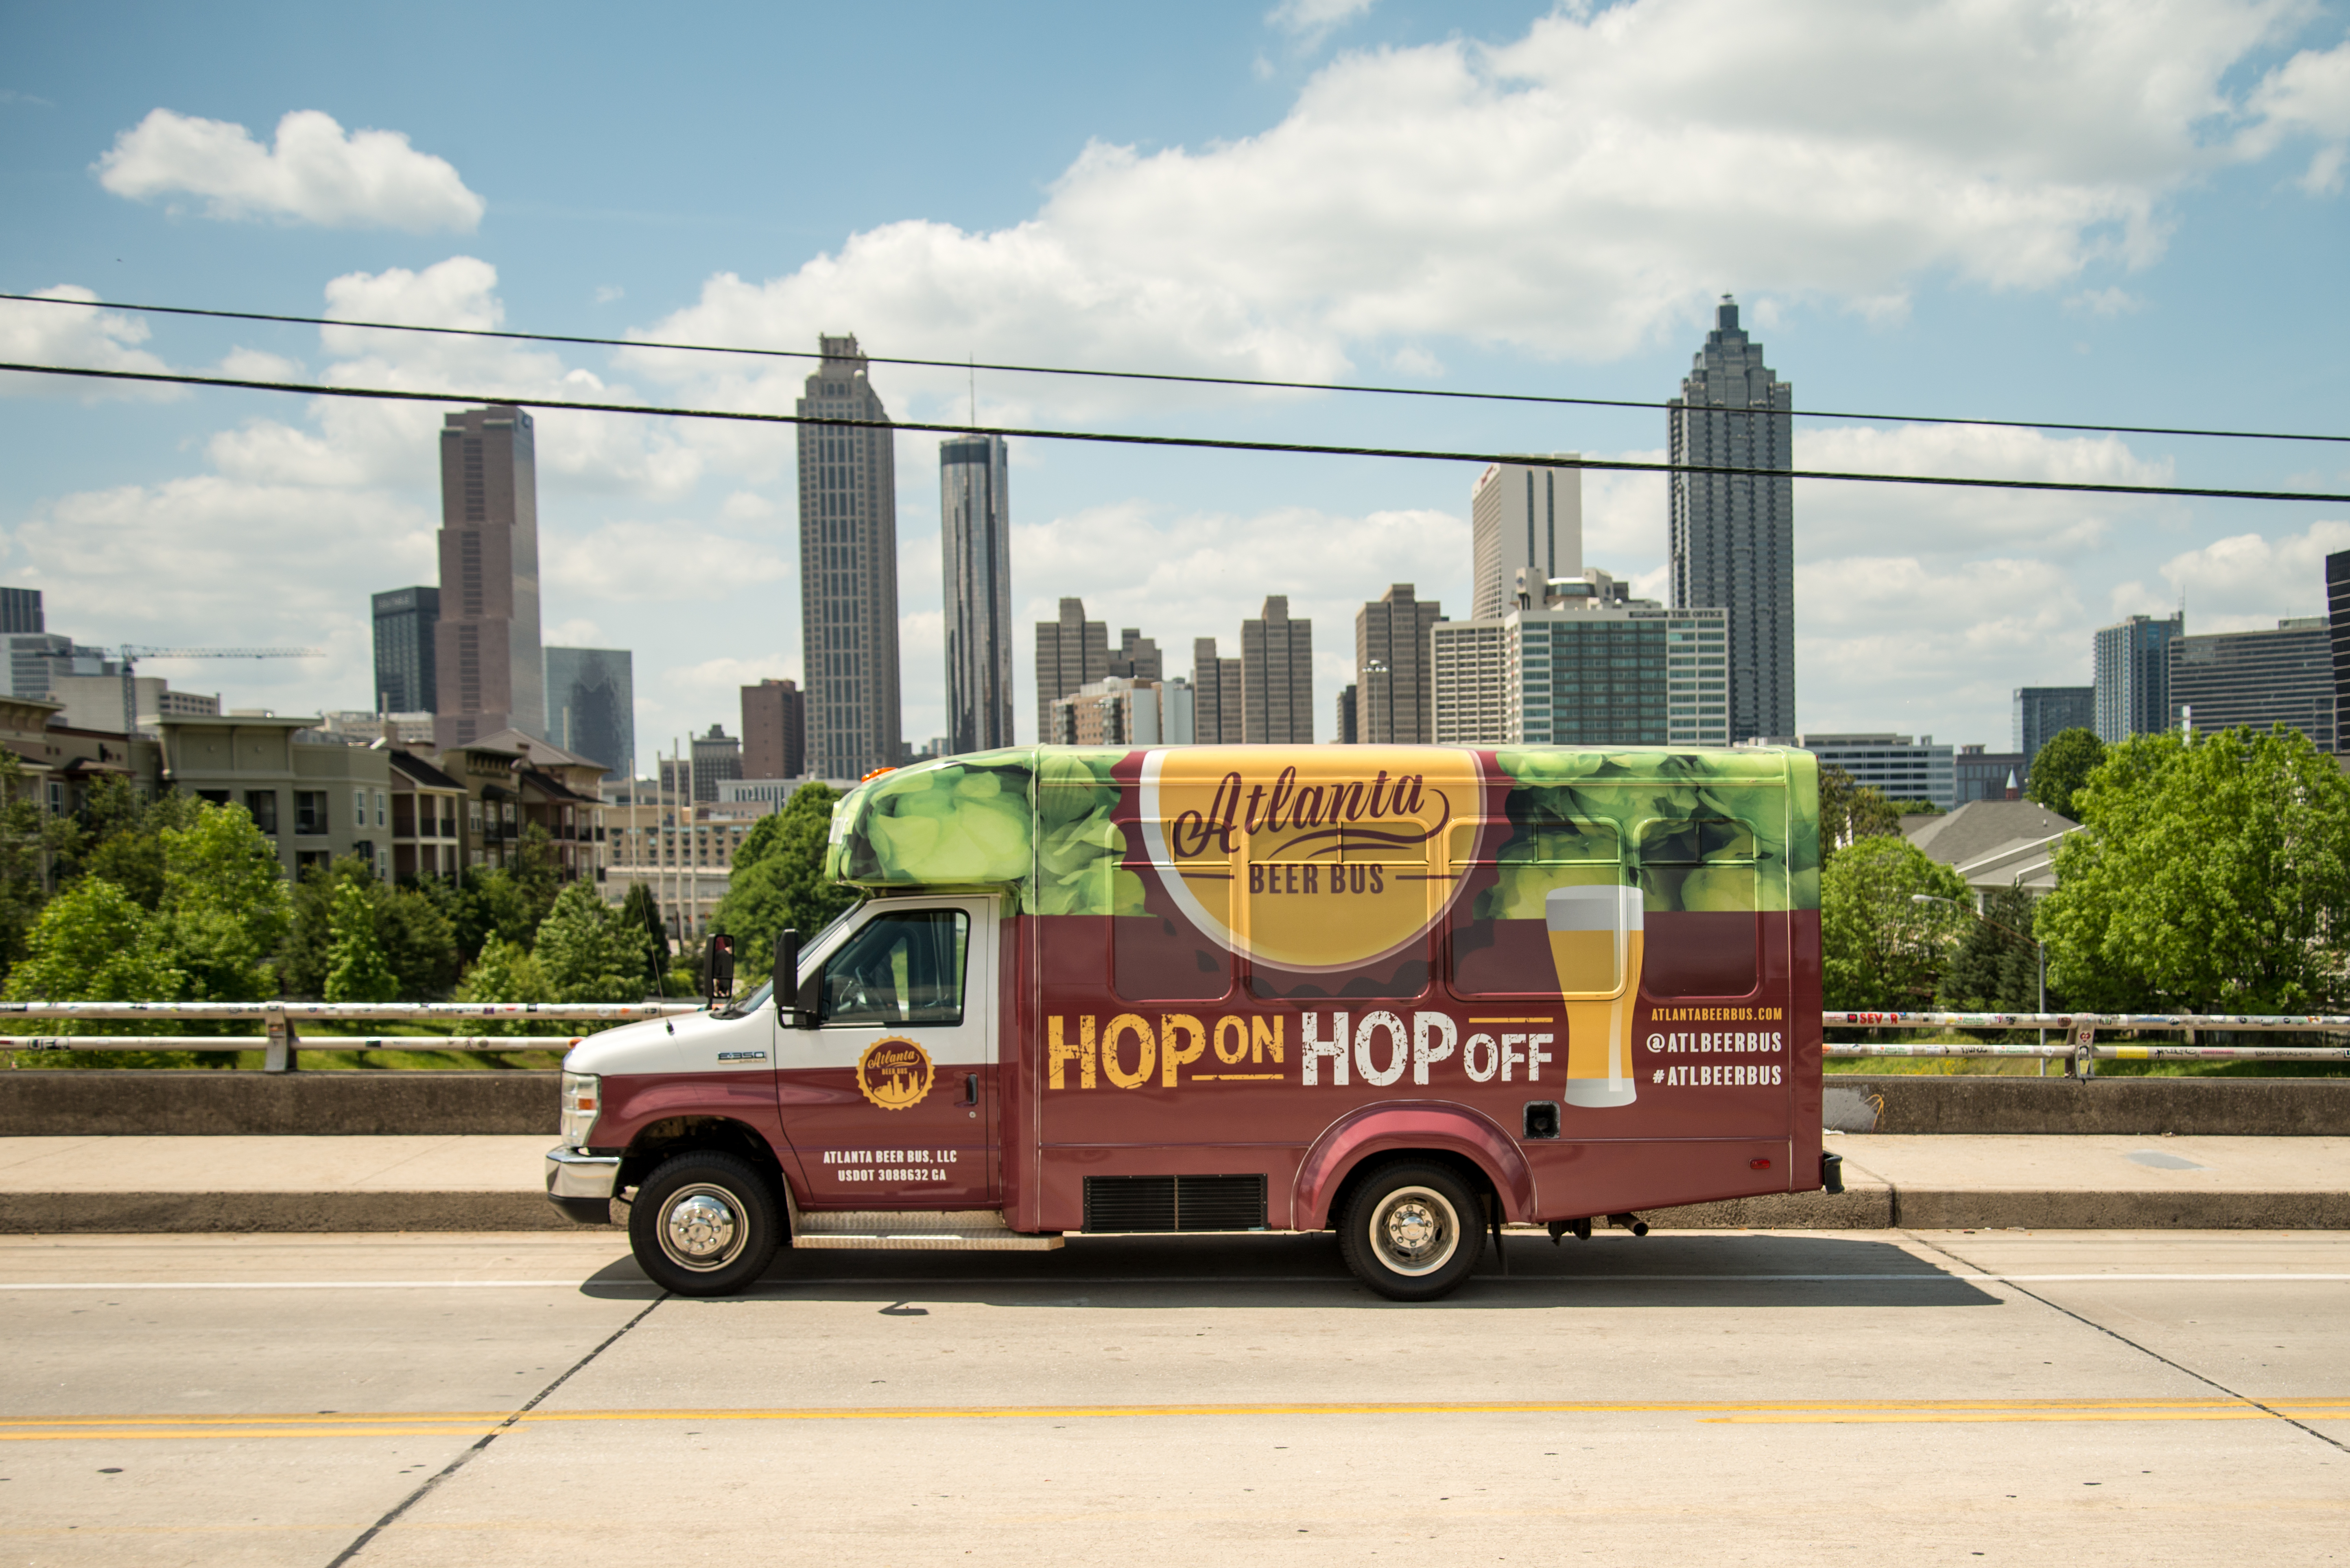 Take the Atlanta Beer Bus To Get Schooled on Beers This Semester